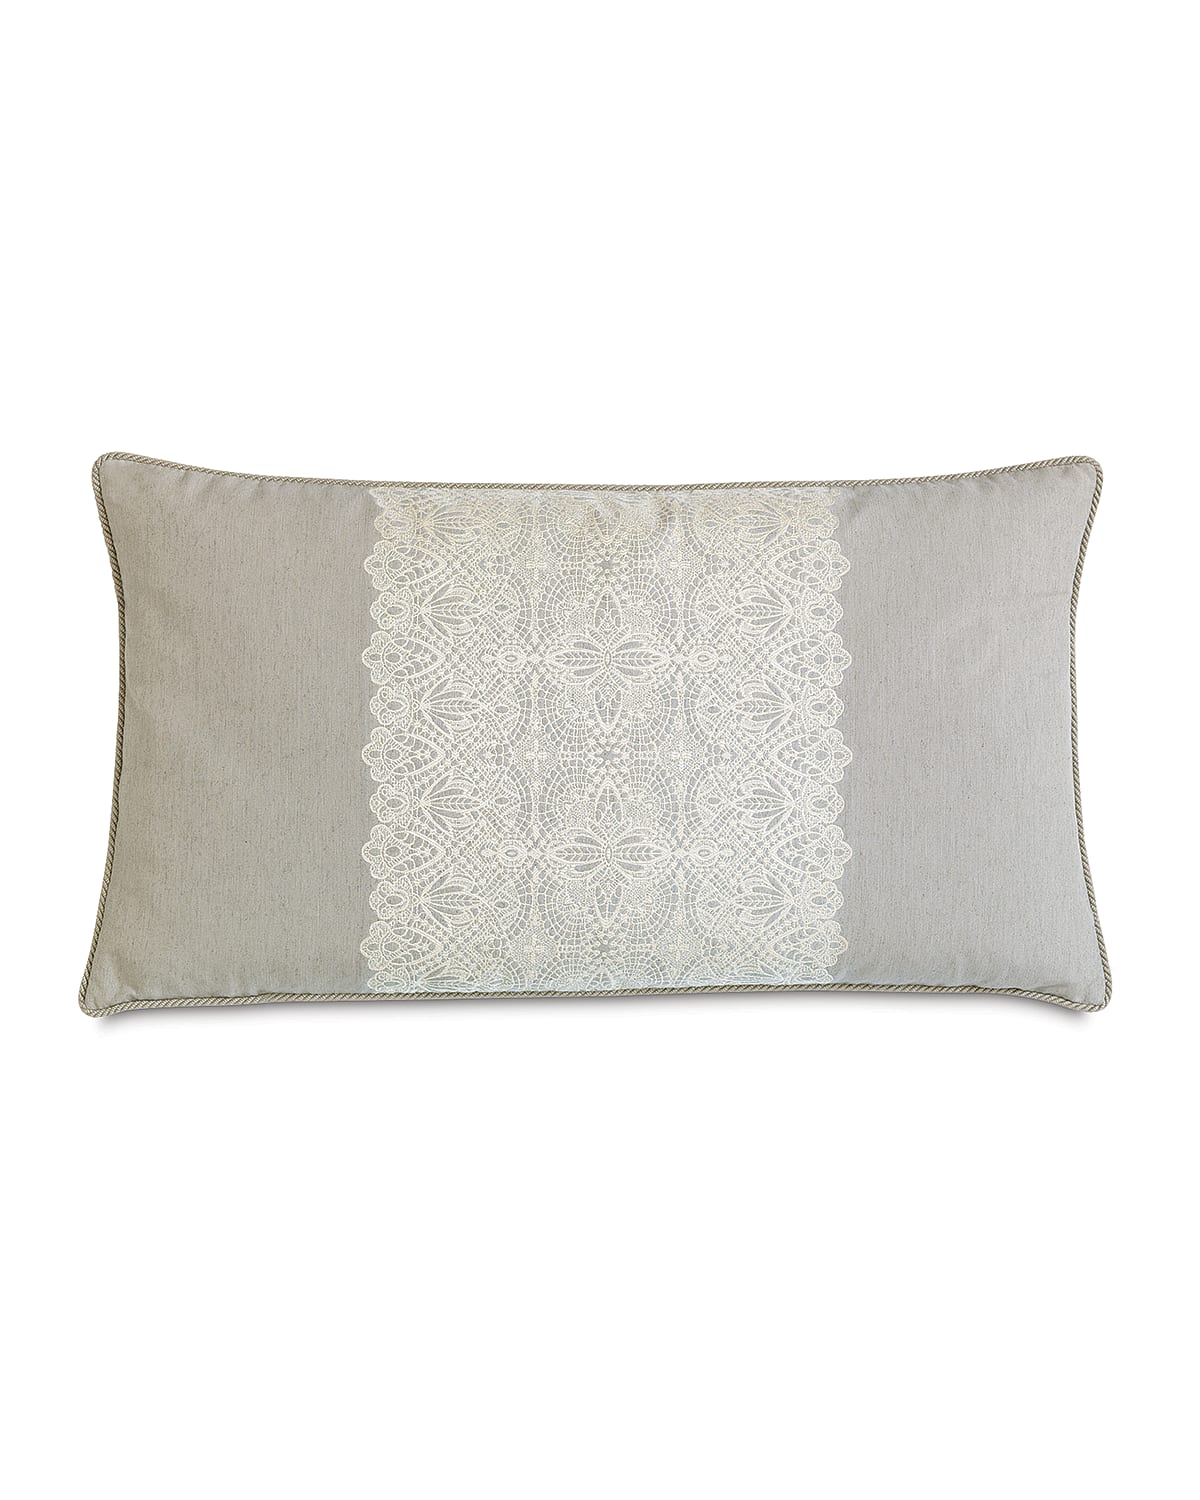 Image Eastern Accents Thayer King Pillow, 21" x 37"